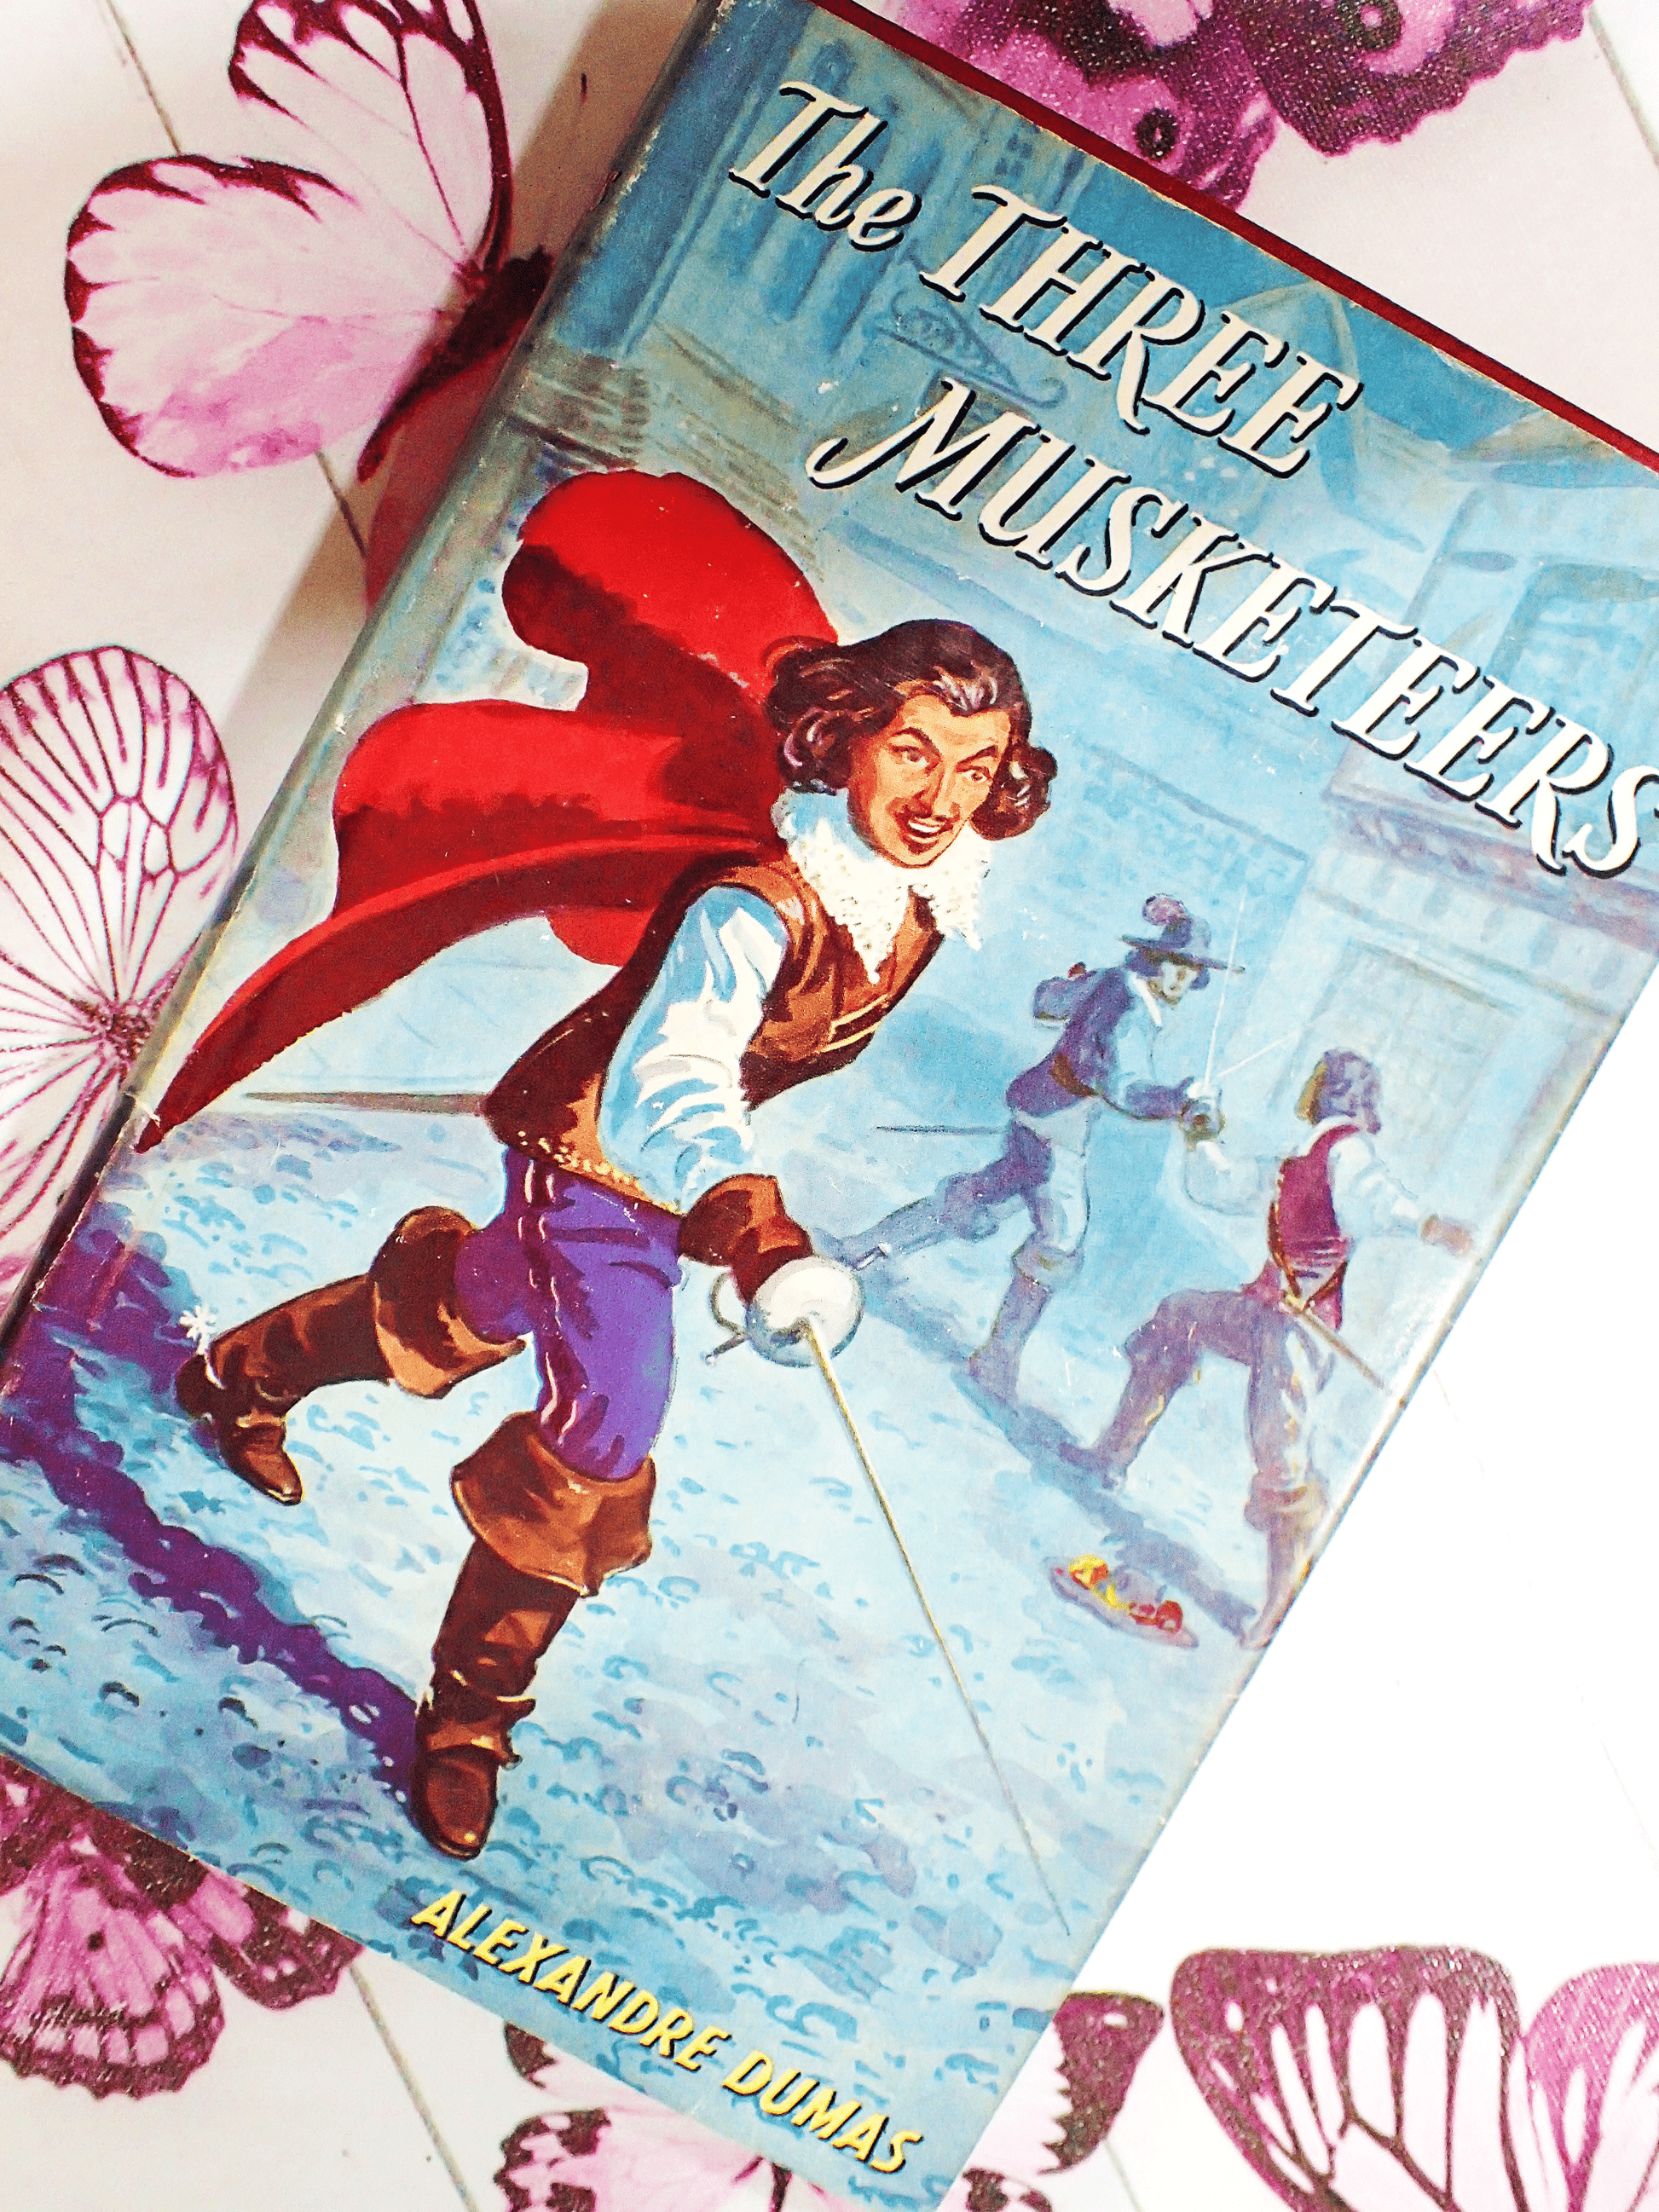 The Front cover of the Three Musketeers by Baroness Orczy vintage book showing a dashing D'artagnan holding a sword. 